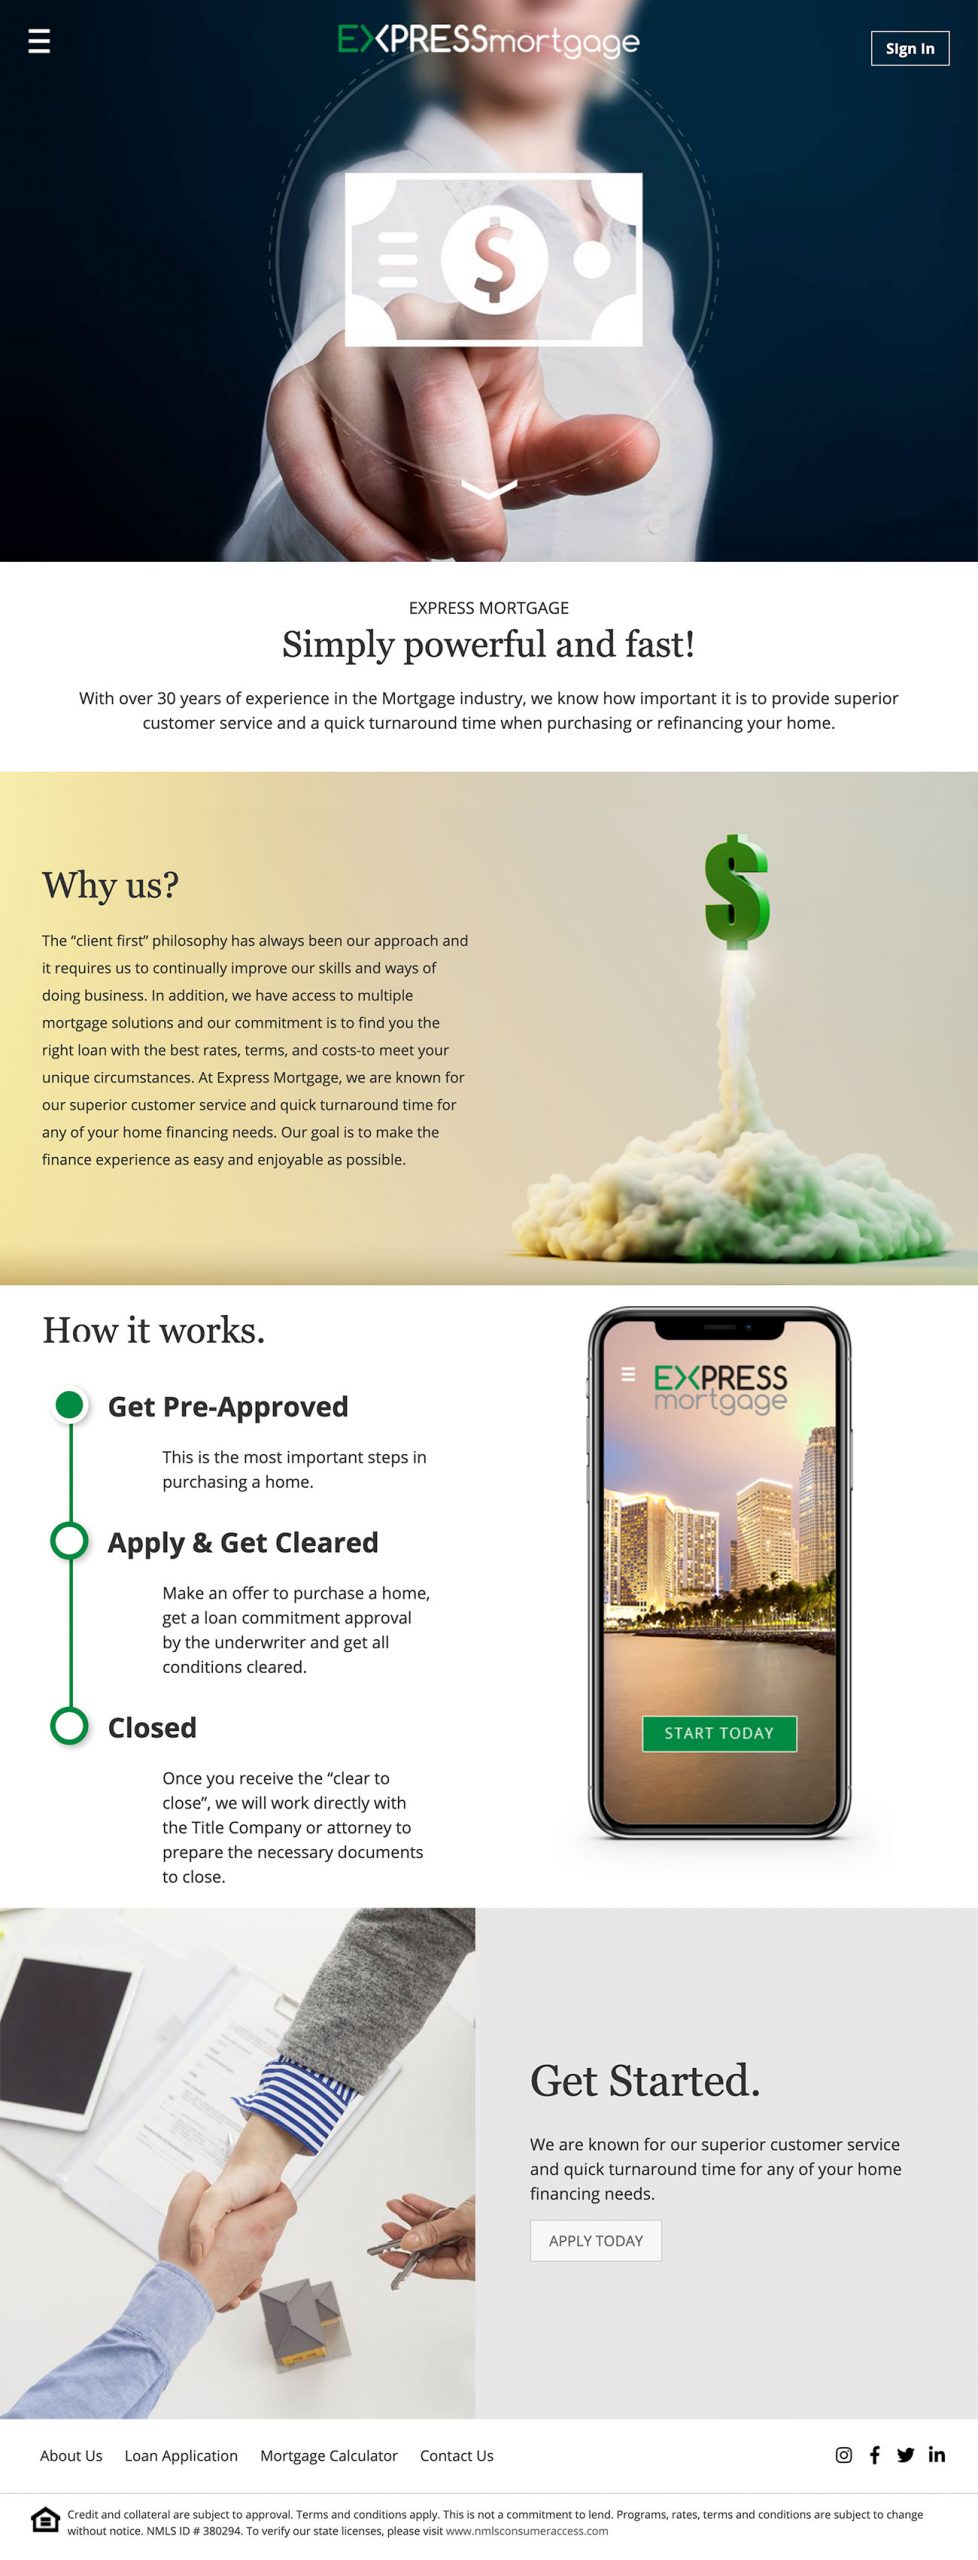 Express Mortgage - Web Design by M&O